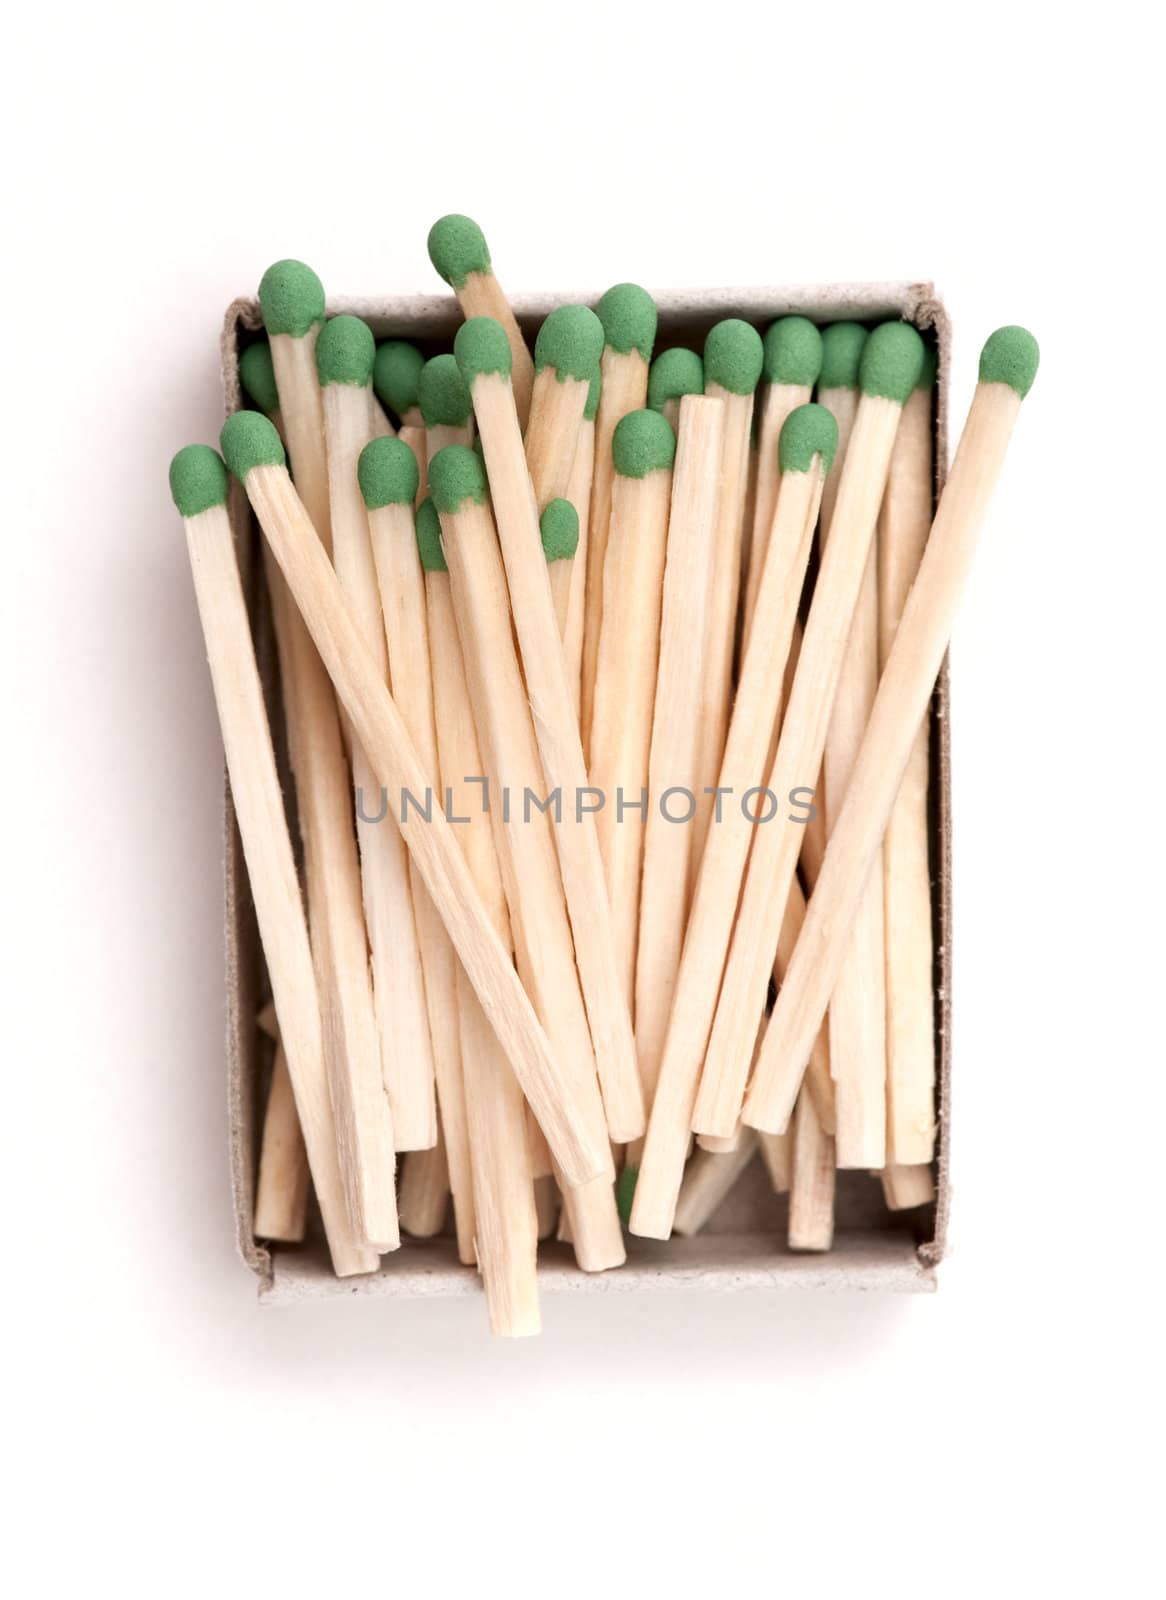 opened box of matches on a white background by DNKSTUDIO